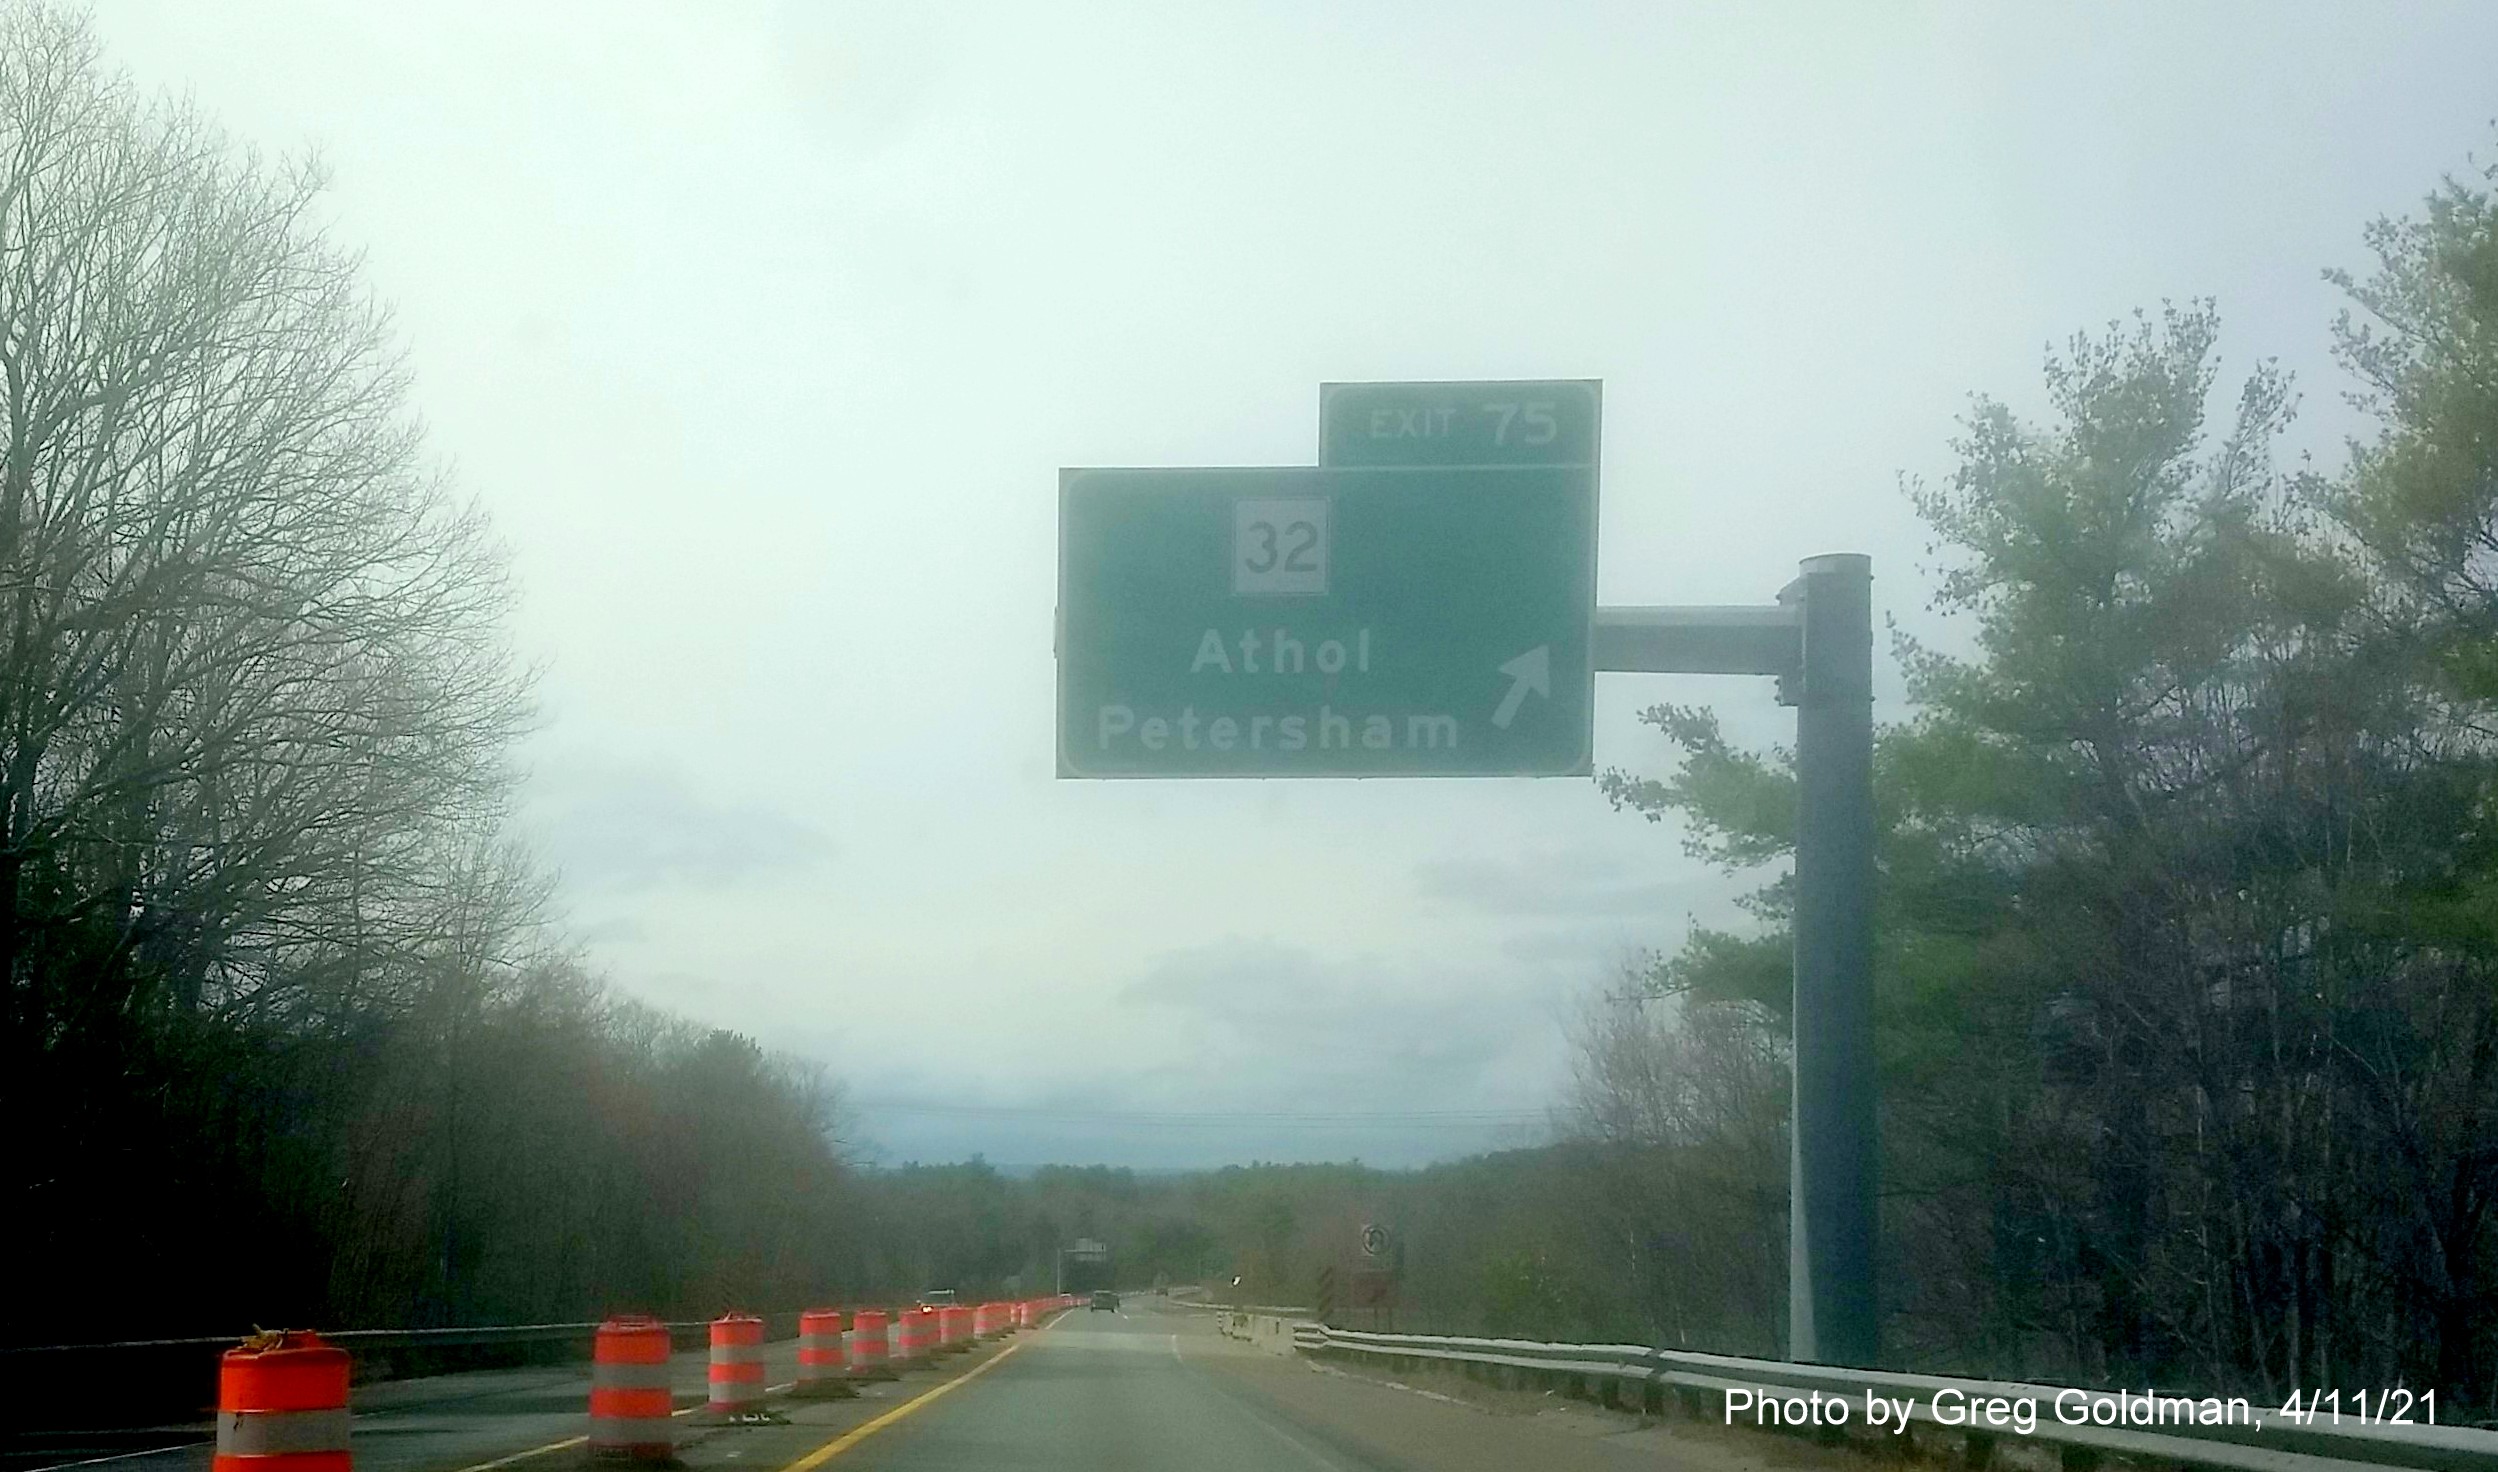 Image of ramp sign for MA 32 exit with new milepost based exit number on MA 2 West in Athol, by Greg Goldman, April 2021